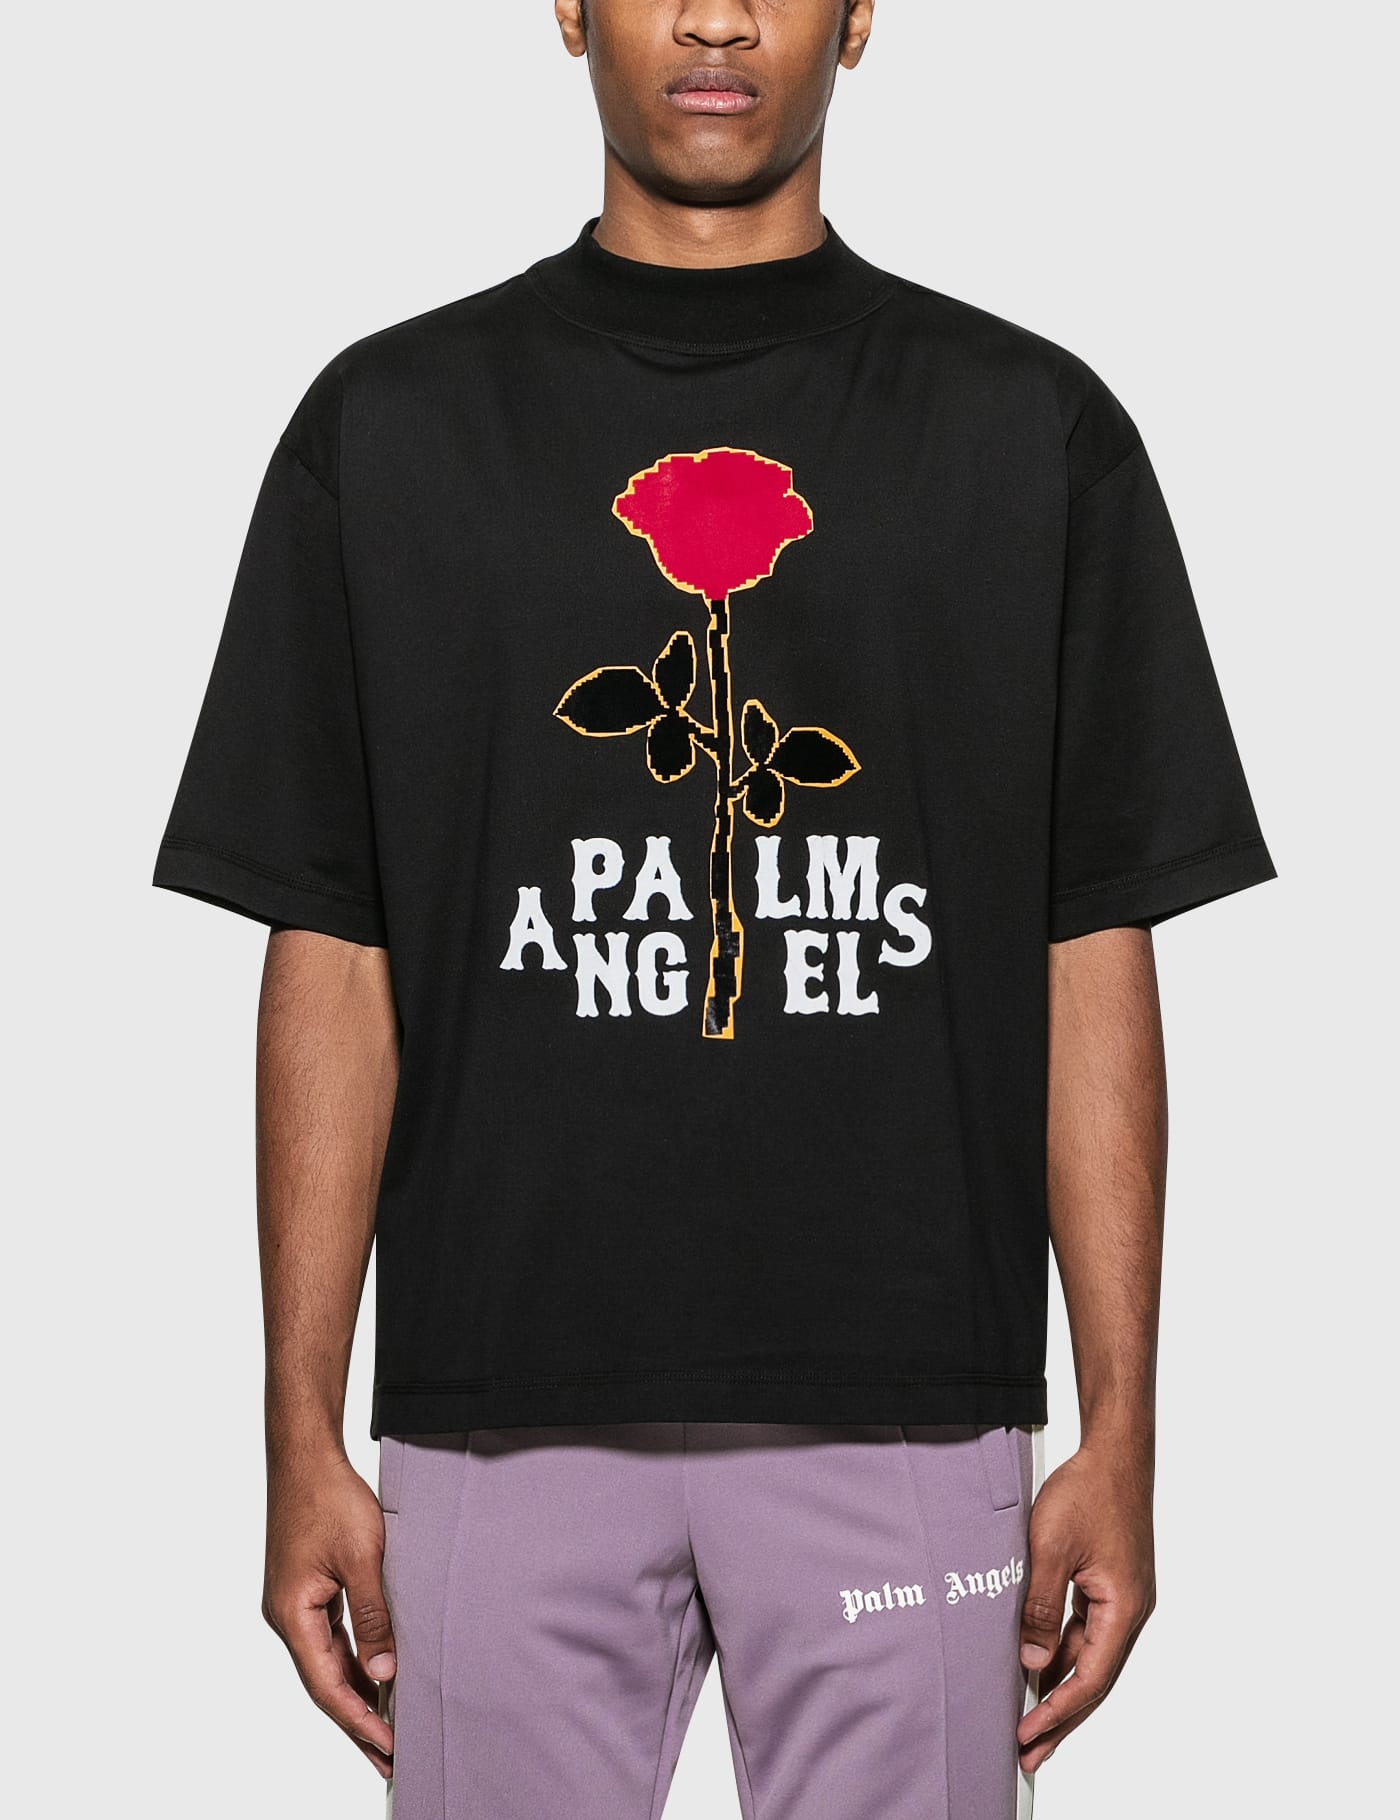 black and red palm angels t shirt